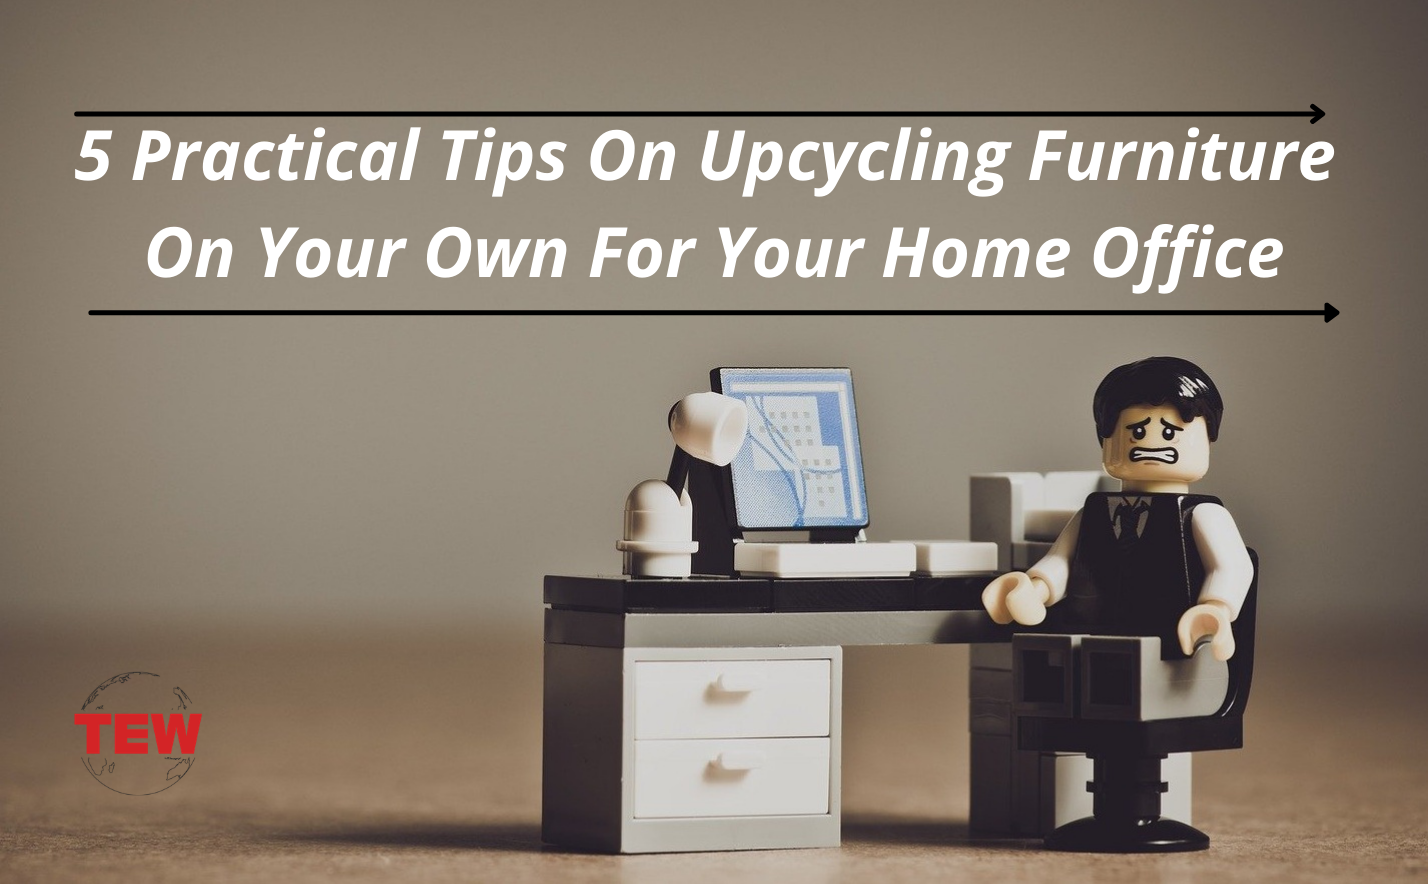 5 Practical Tips On Upcycling Furniture On Your Own For Your Home Office